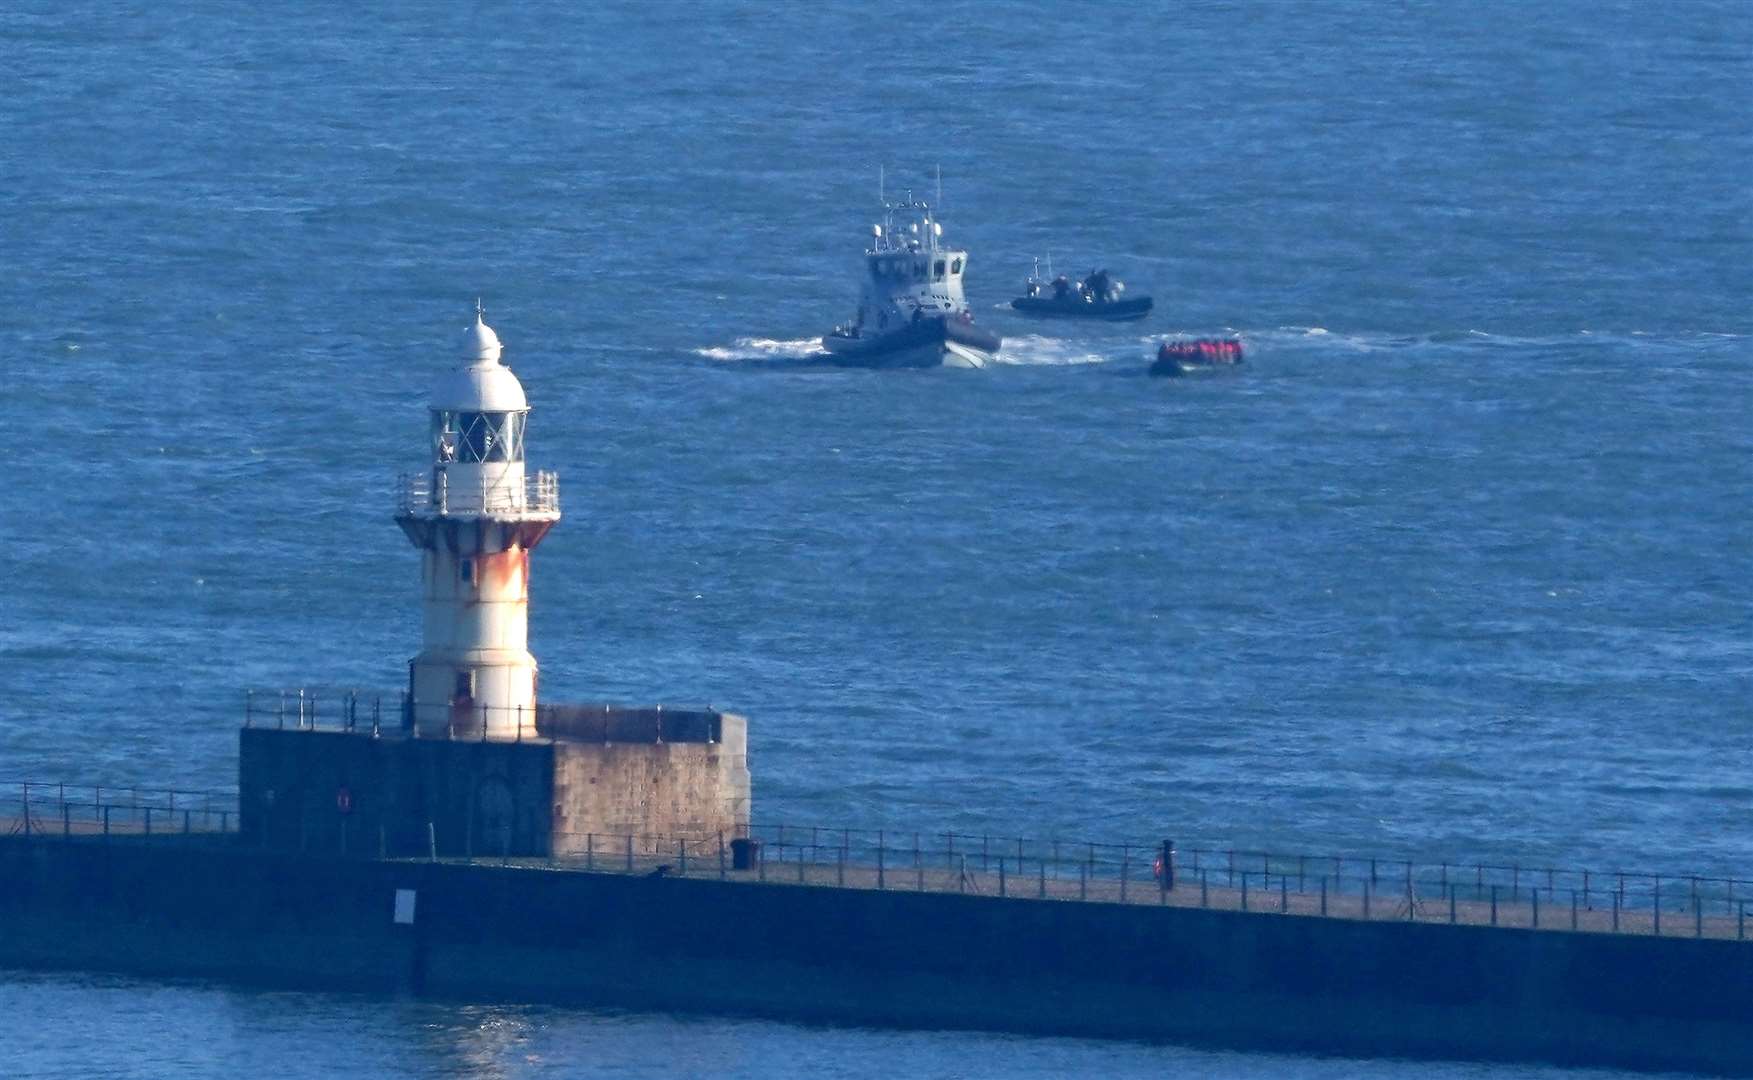 A small boat carrying people thought to be migrants is intercepted by Border Force vessels near the entrance to the Port of Dover in Kent (Gareth Fuller/PA)